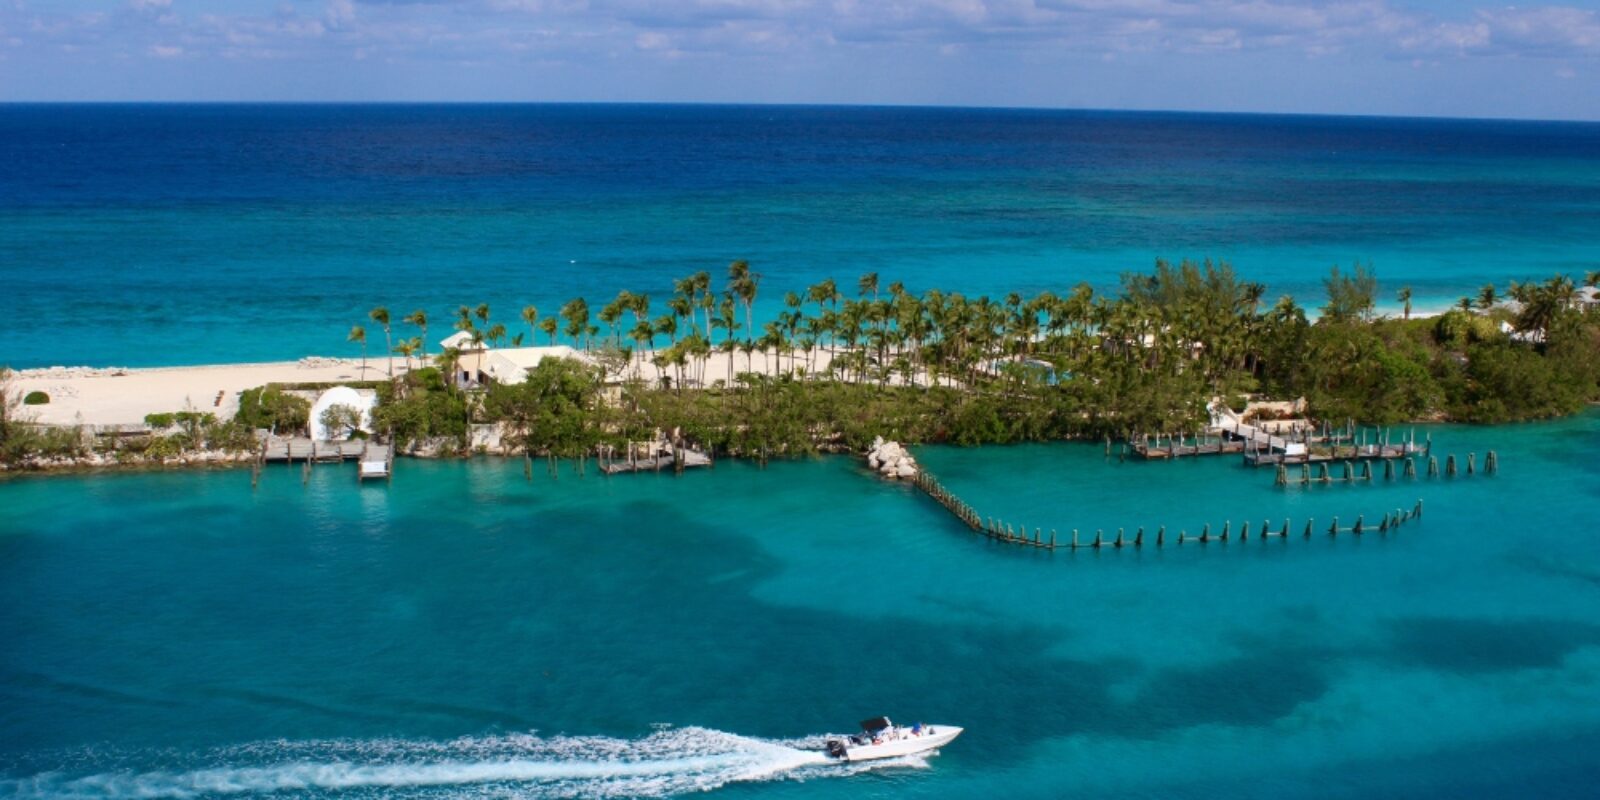 An image of a Nassau port from an article about "senior trip to nassau."